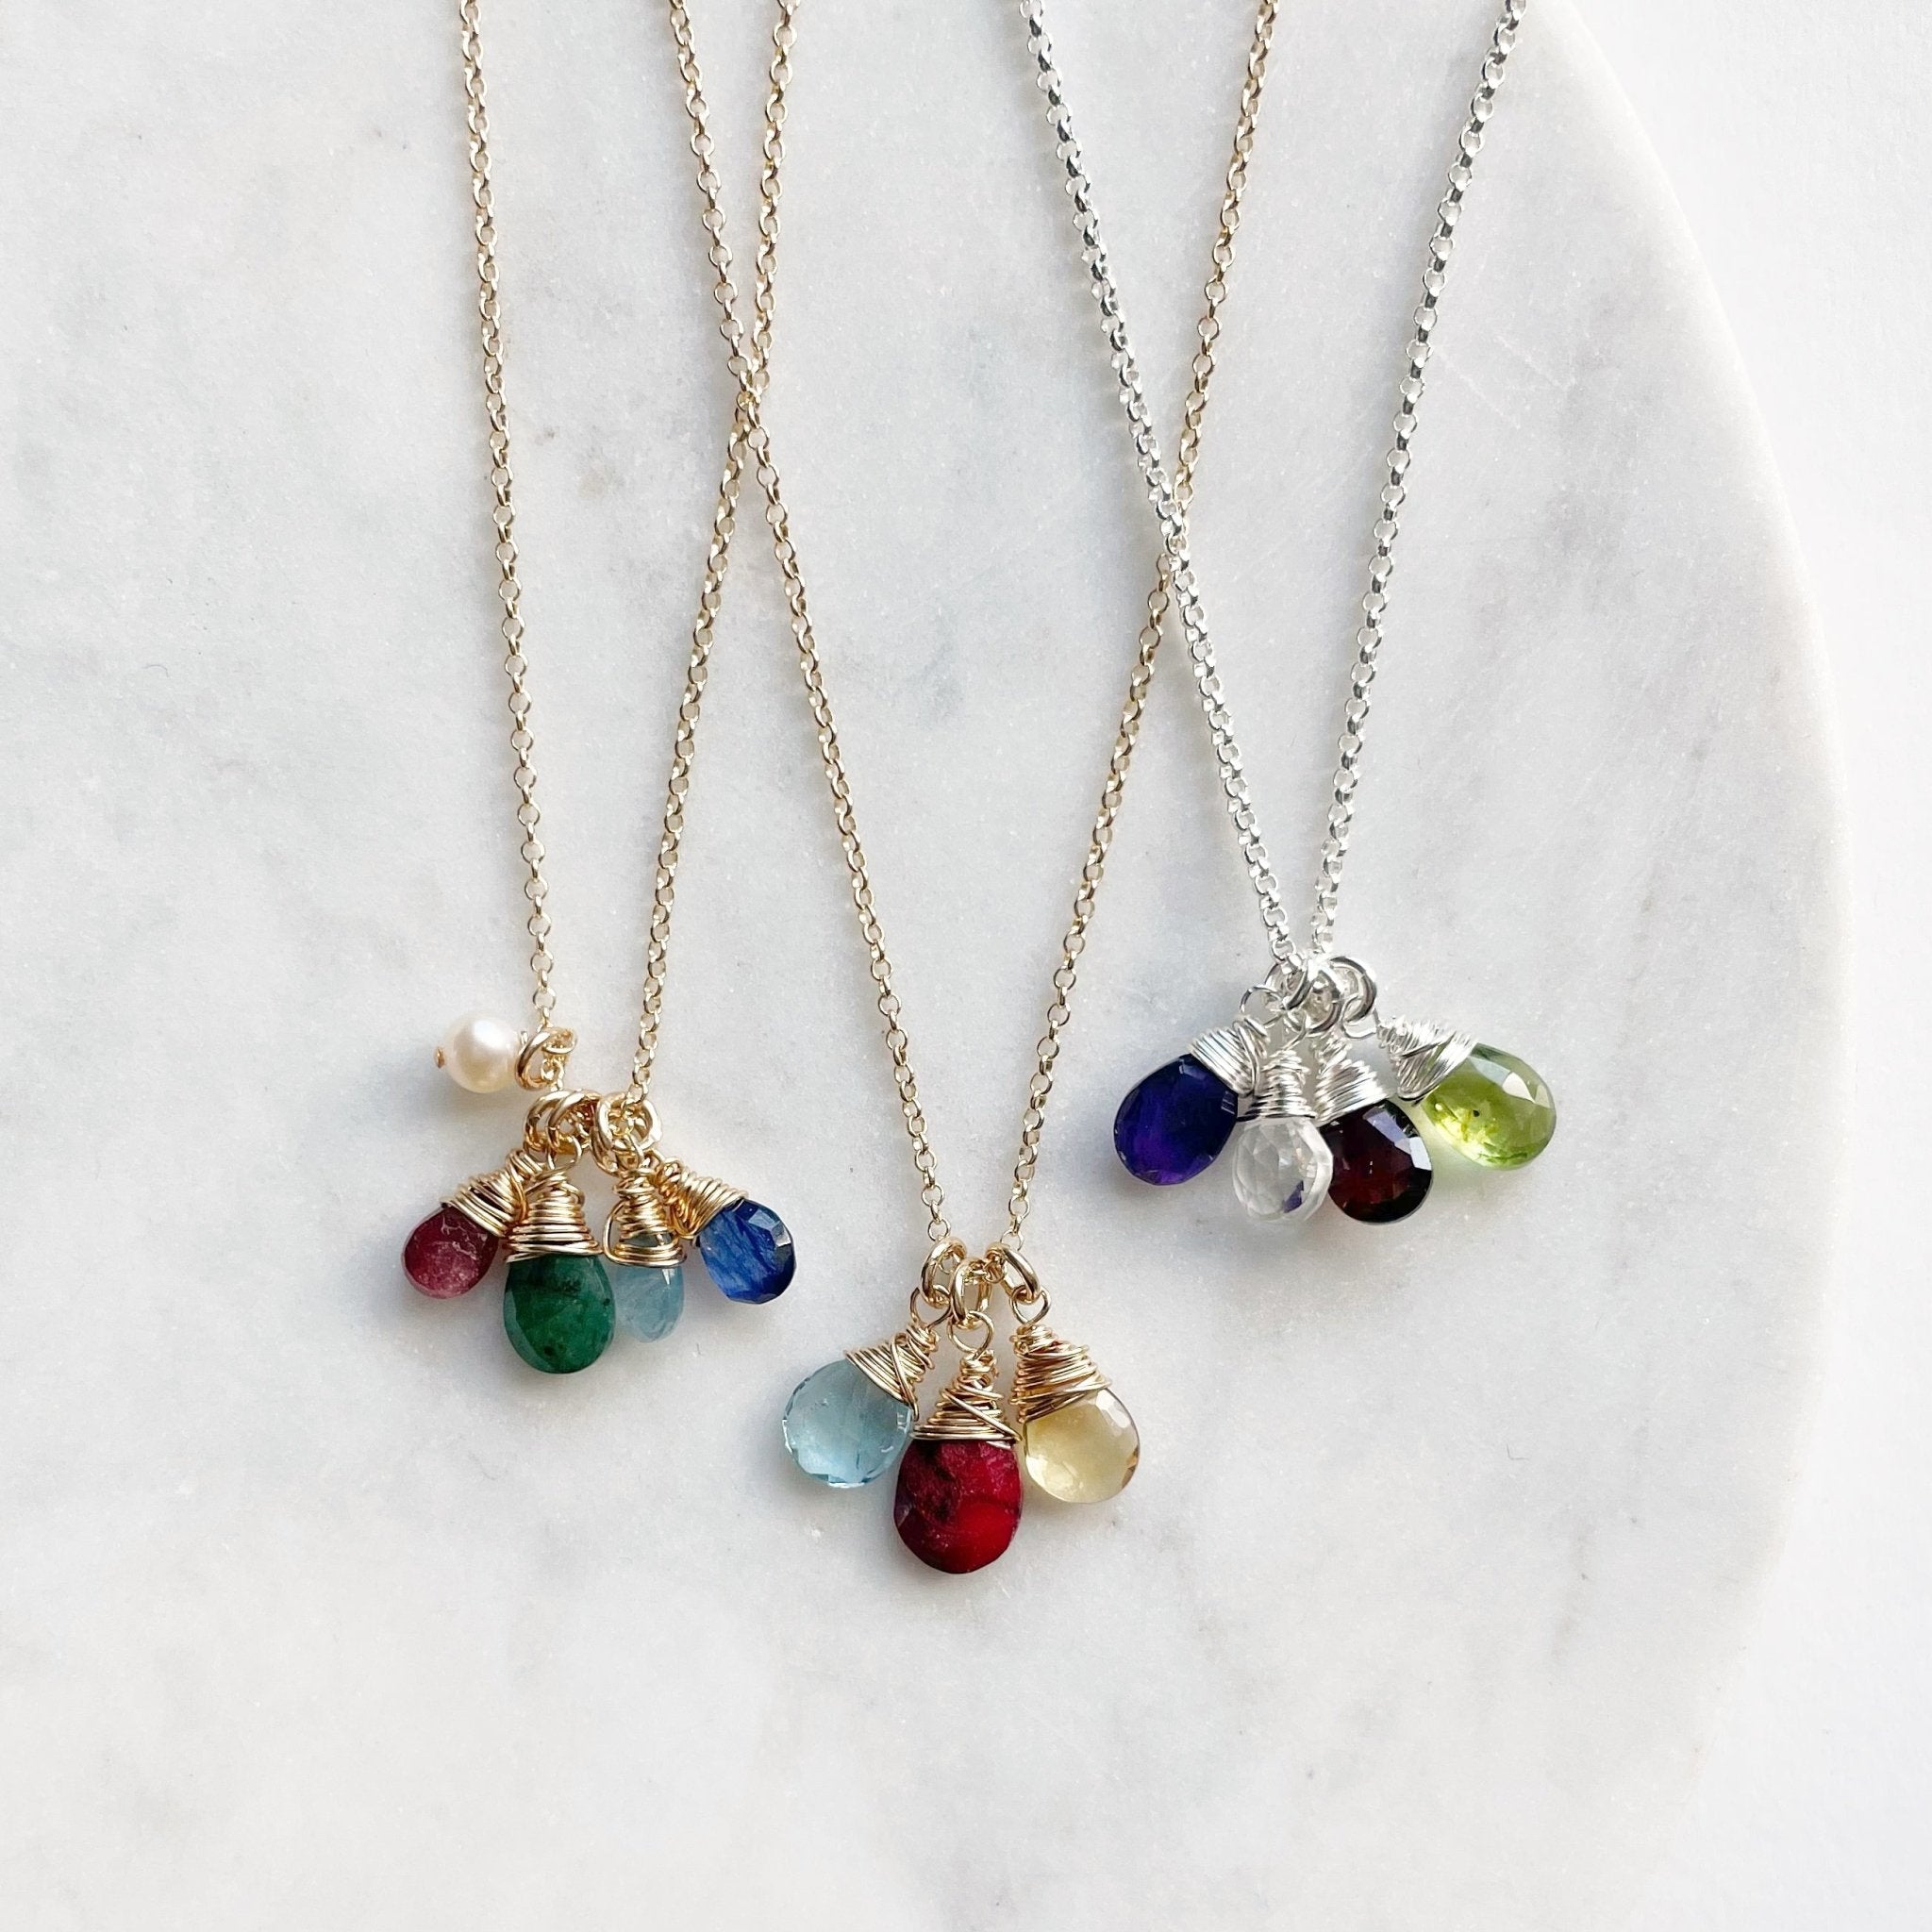 3 wire wrapped gemstone birthstone necklaces, 2 gold and one silver, with various numbers and types of gemstone pendants. Heritage Necklace by Sarah Cornwell Jewelry